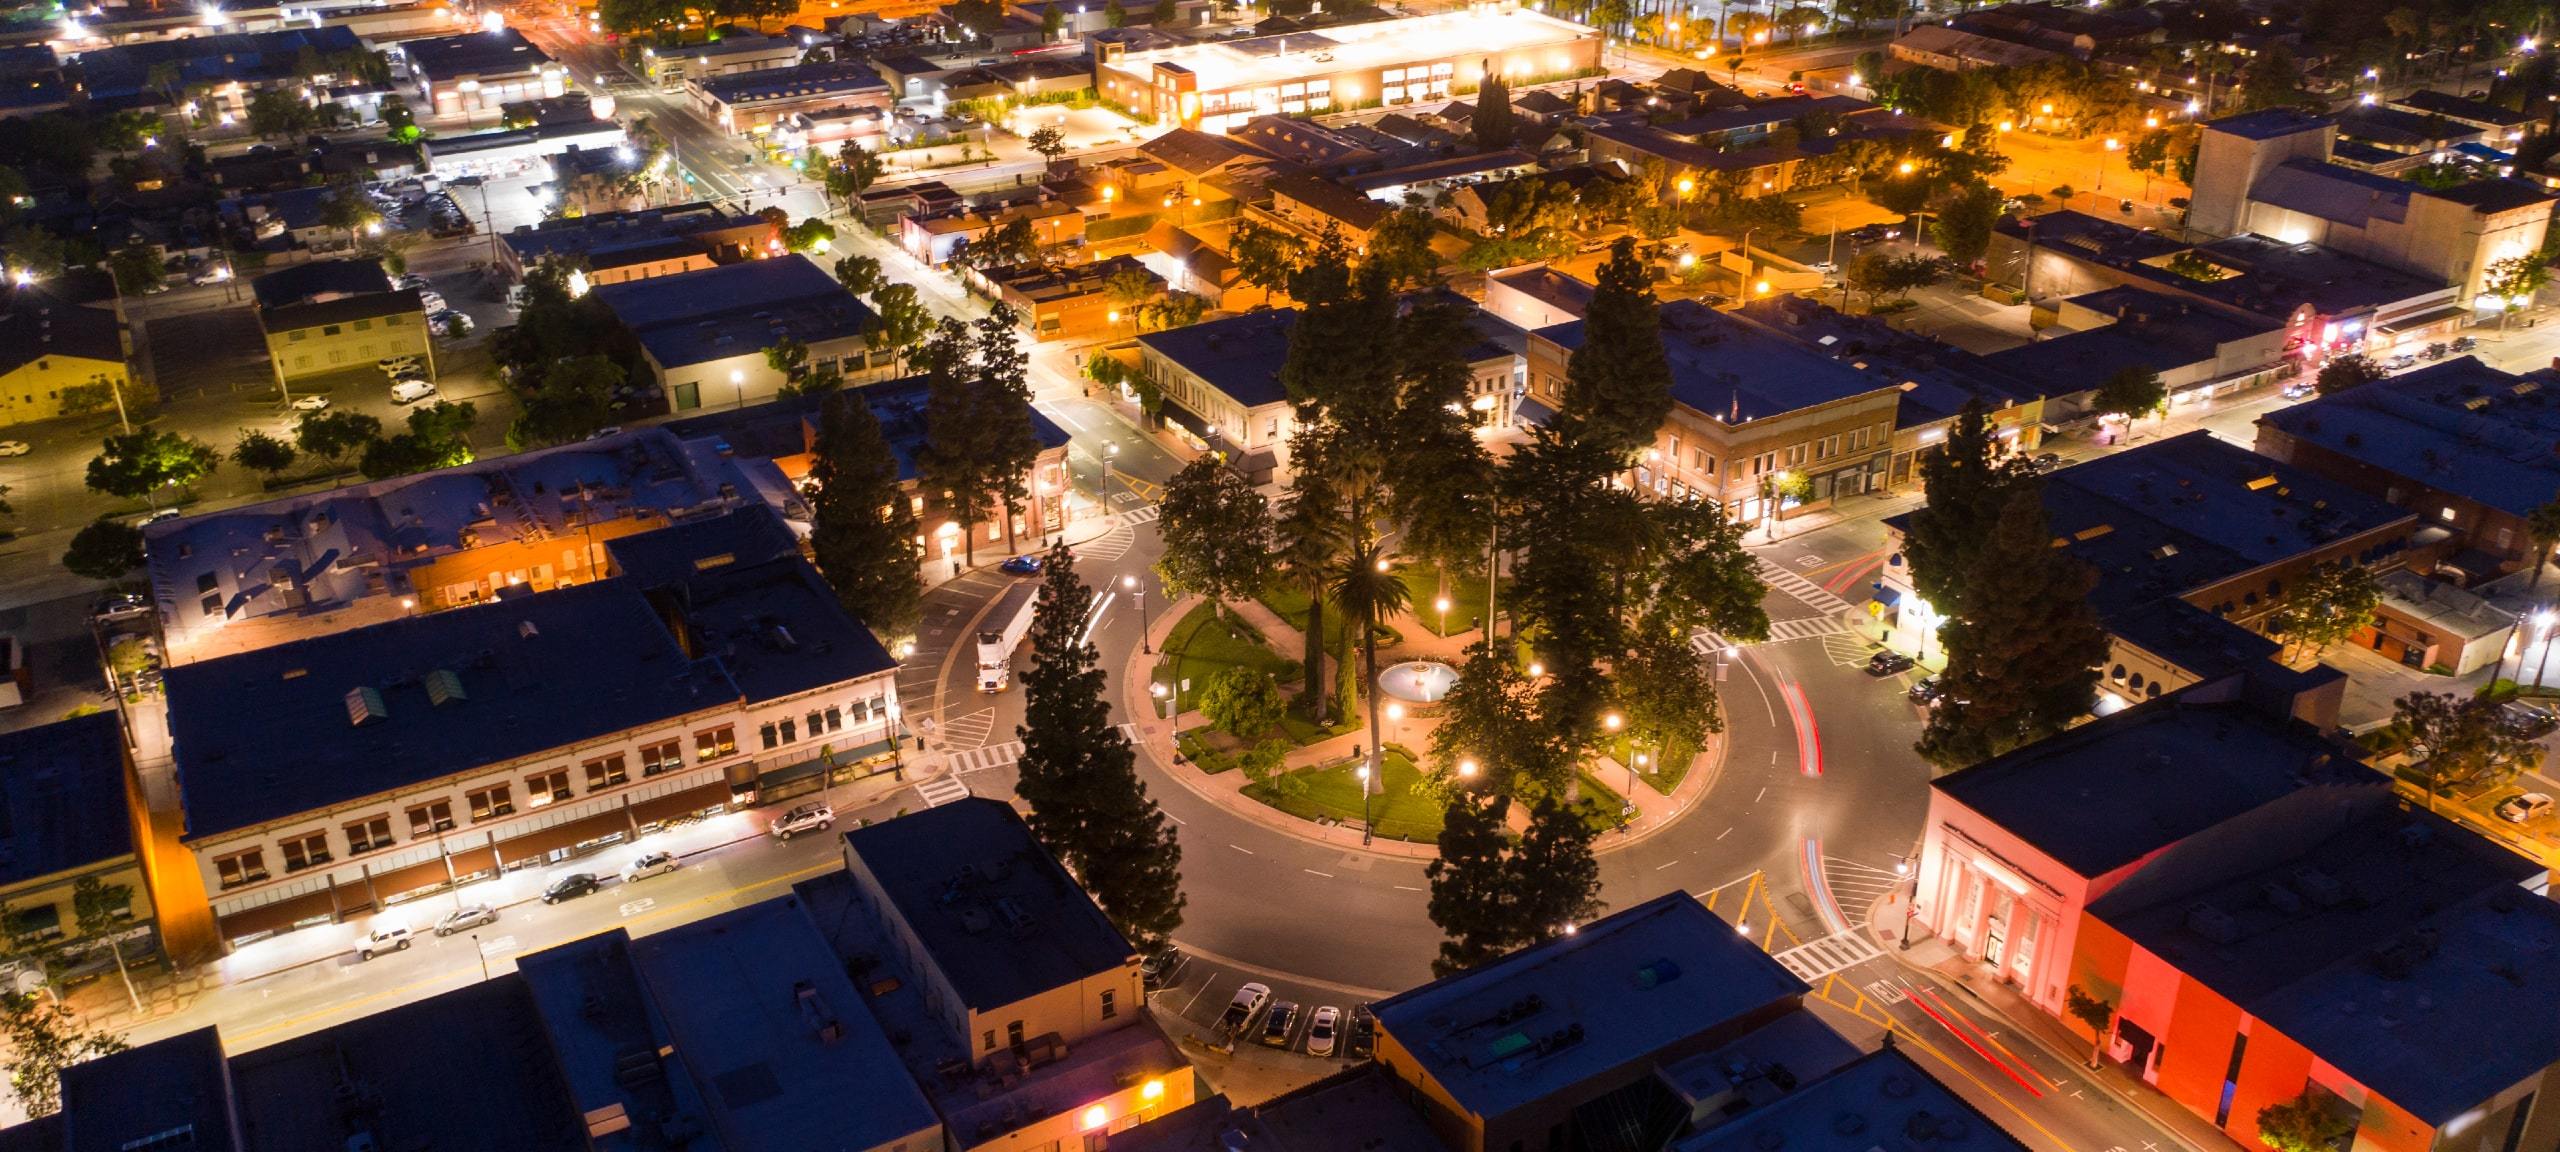 Aerial night view of Plaza Square and buildings in Orange, CA